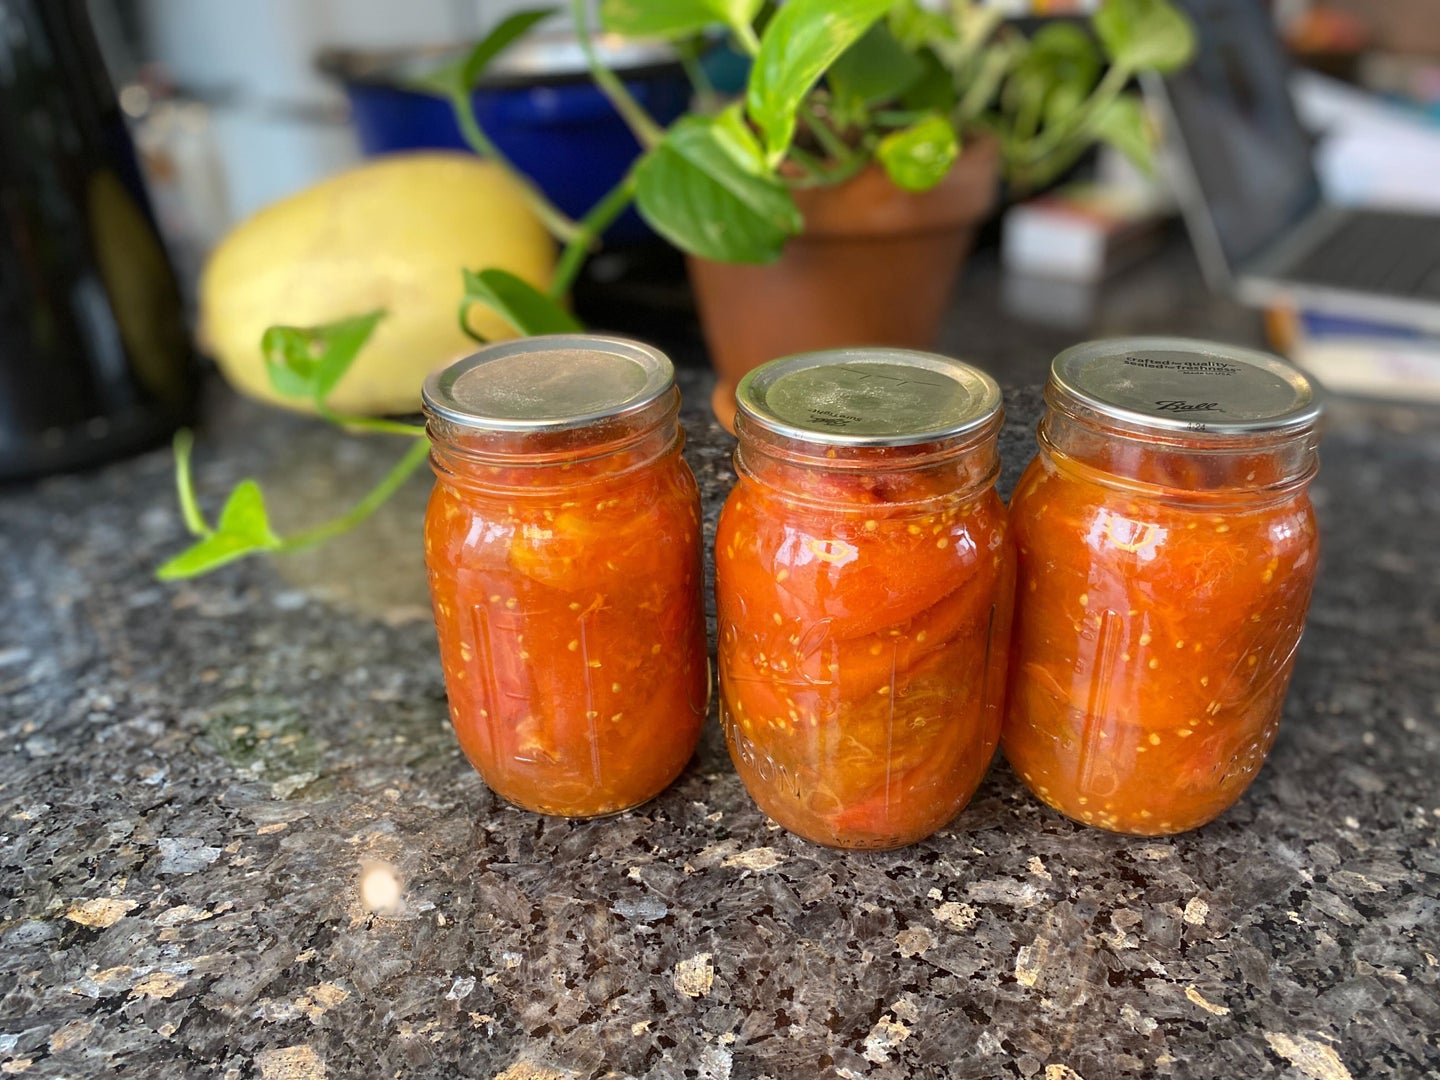 canned tomatoes in jars on a marble countertop near a plant